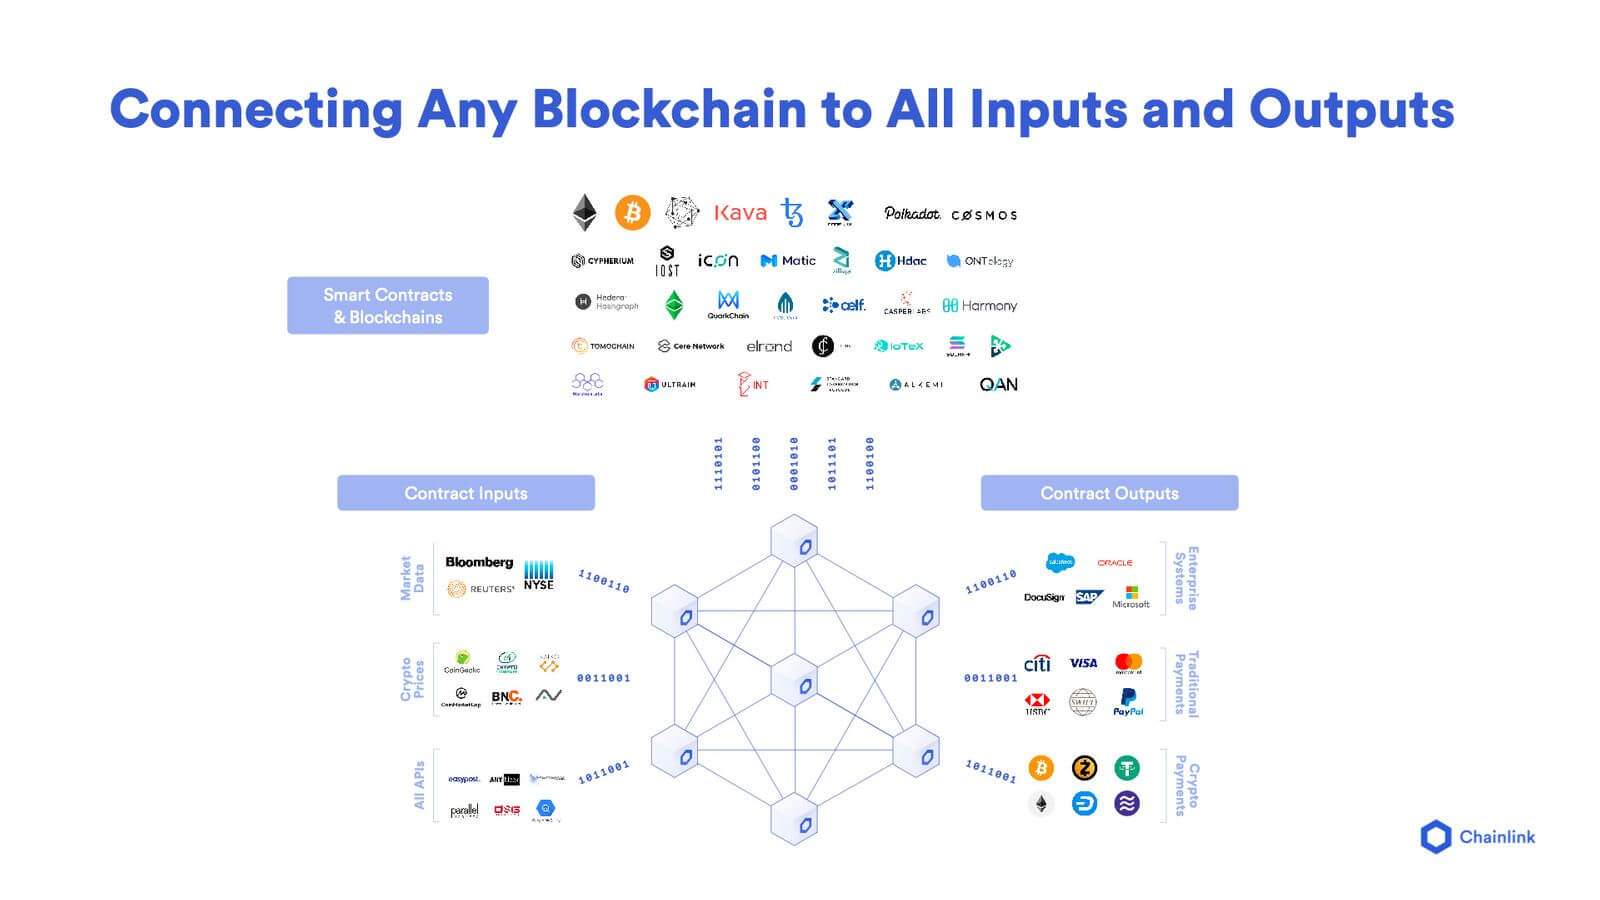 A diagram showing how Chainlink connects any blockchain to different inputs and outputs. 